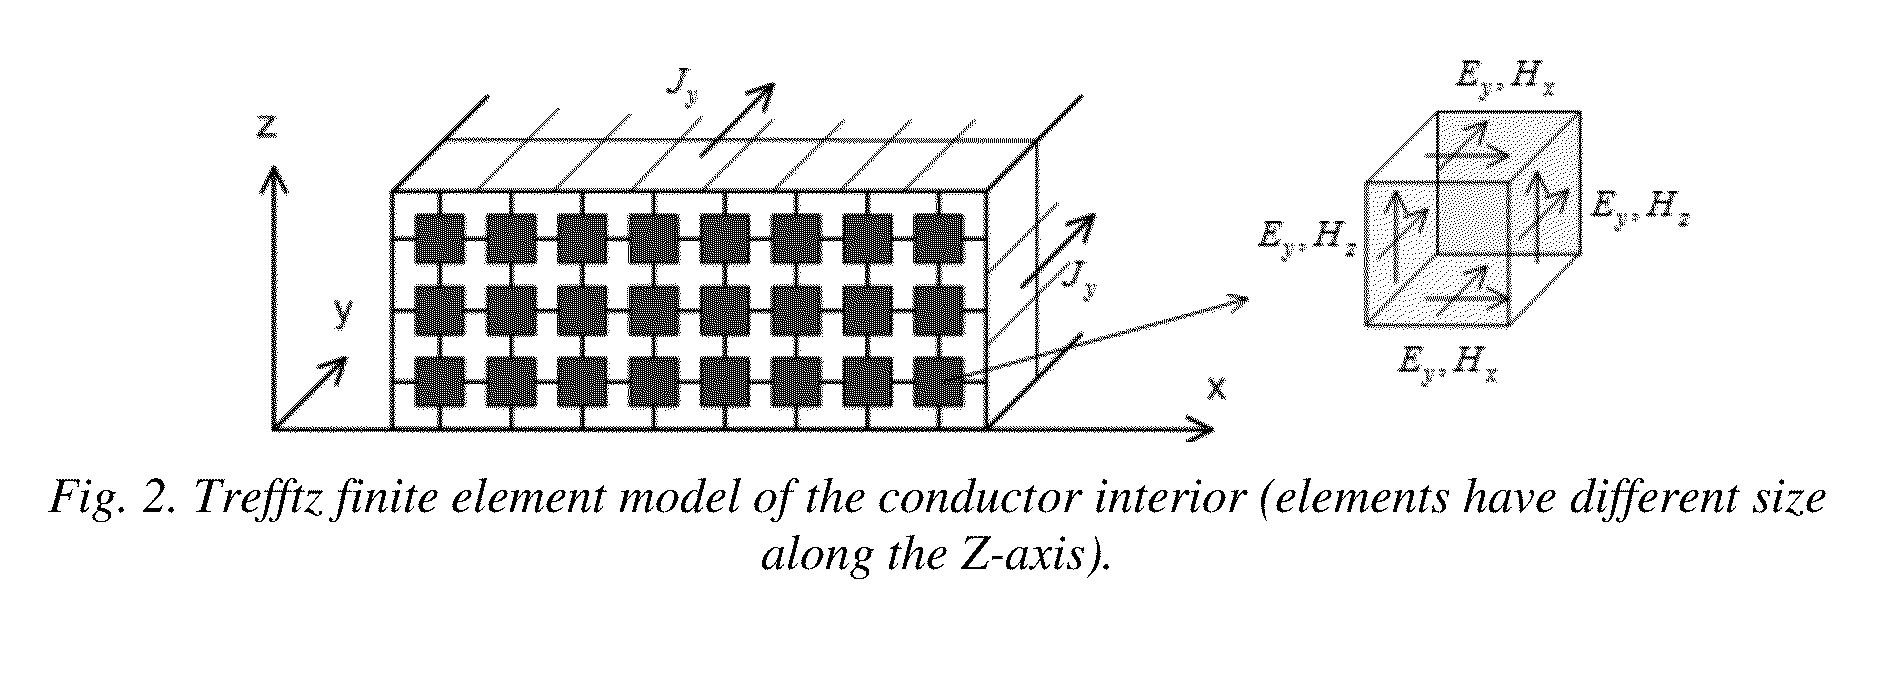 System and method for identification of conductor surface roughness model for transmission lines